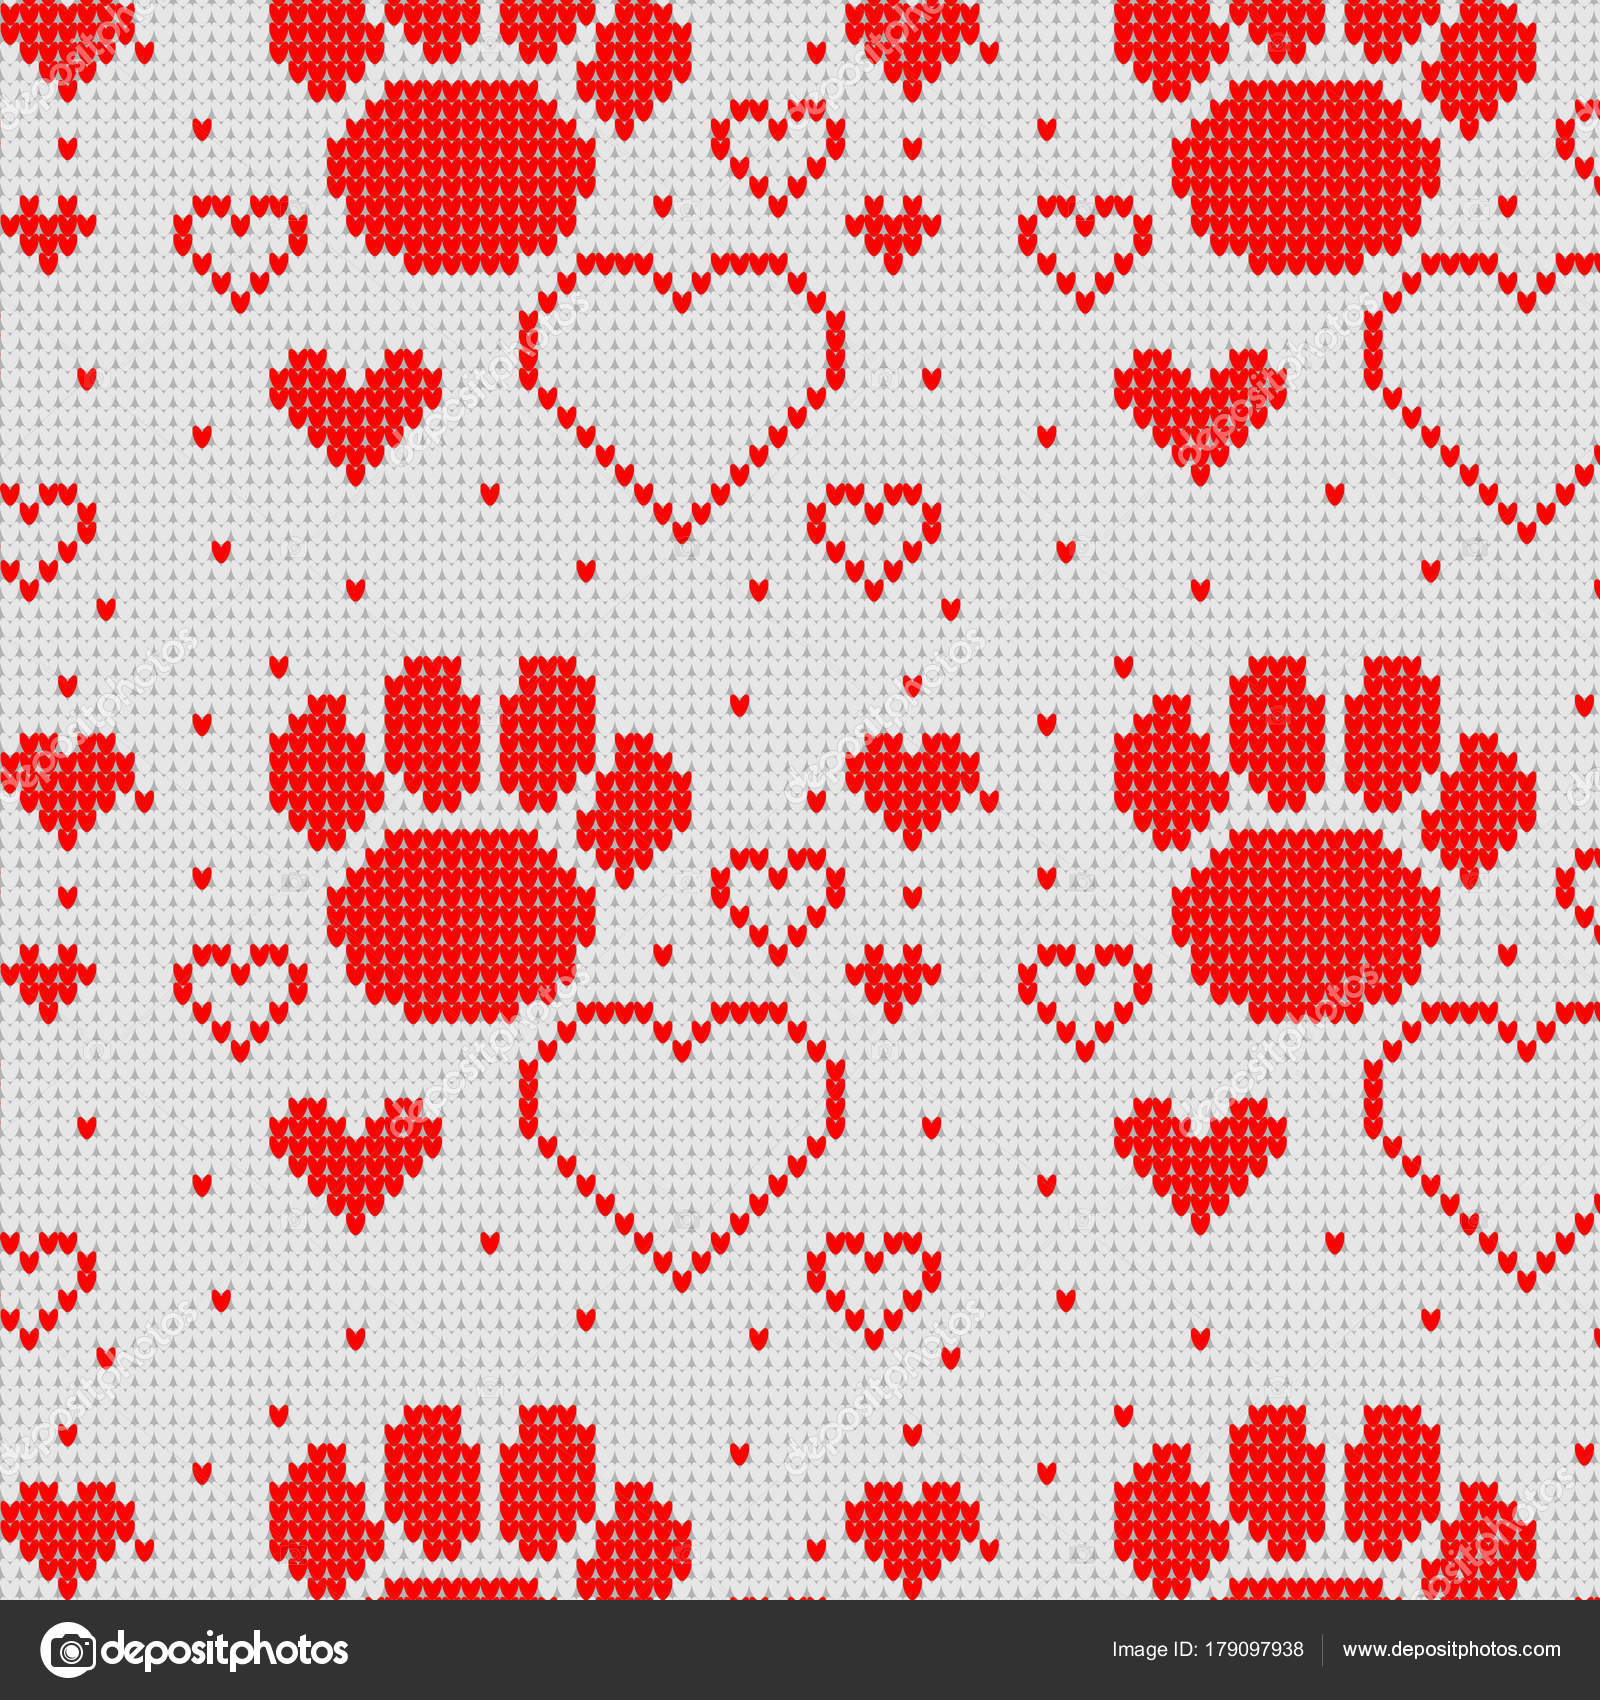 Seamless Knitting Patterns Seamless Knitted Pattern With Heart And Dog Paw Background Stock